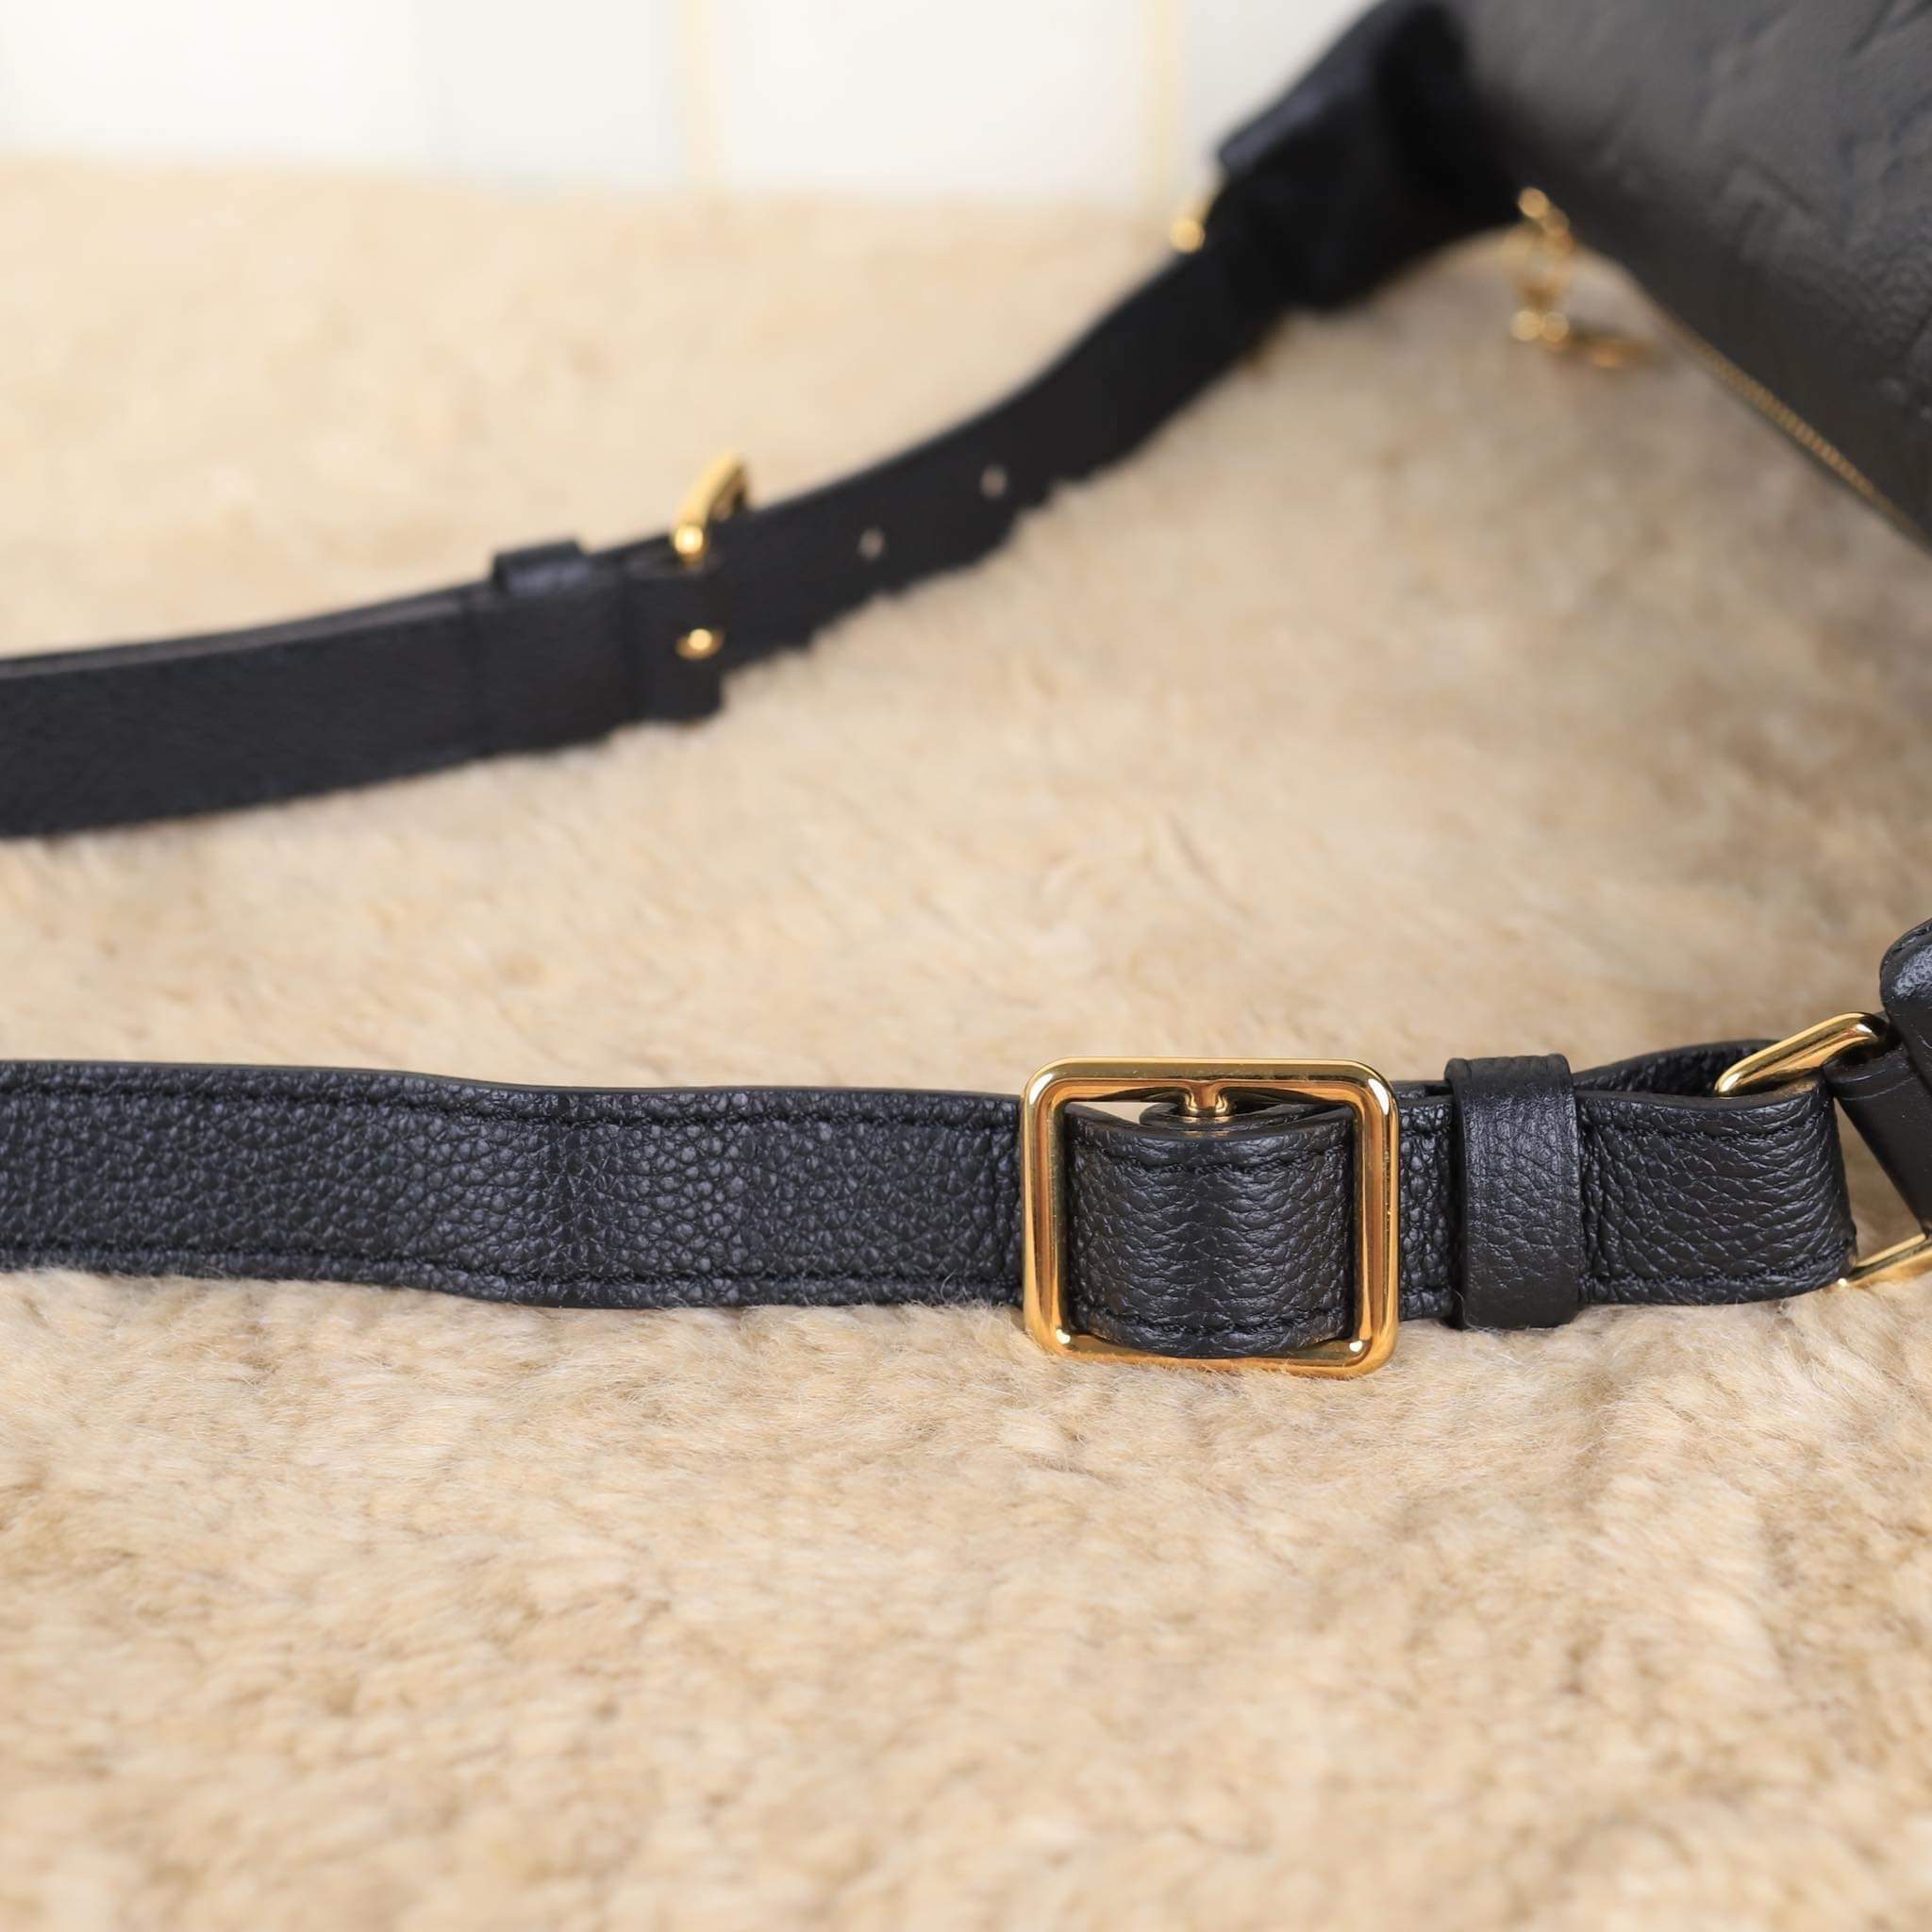 Replacement Leather Belt Strap For Louis Vuitton Buckles 35 Mm Black  Calfskin